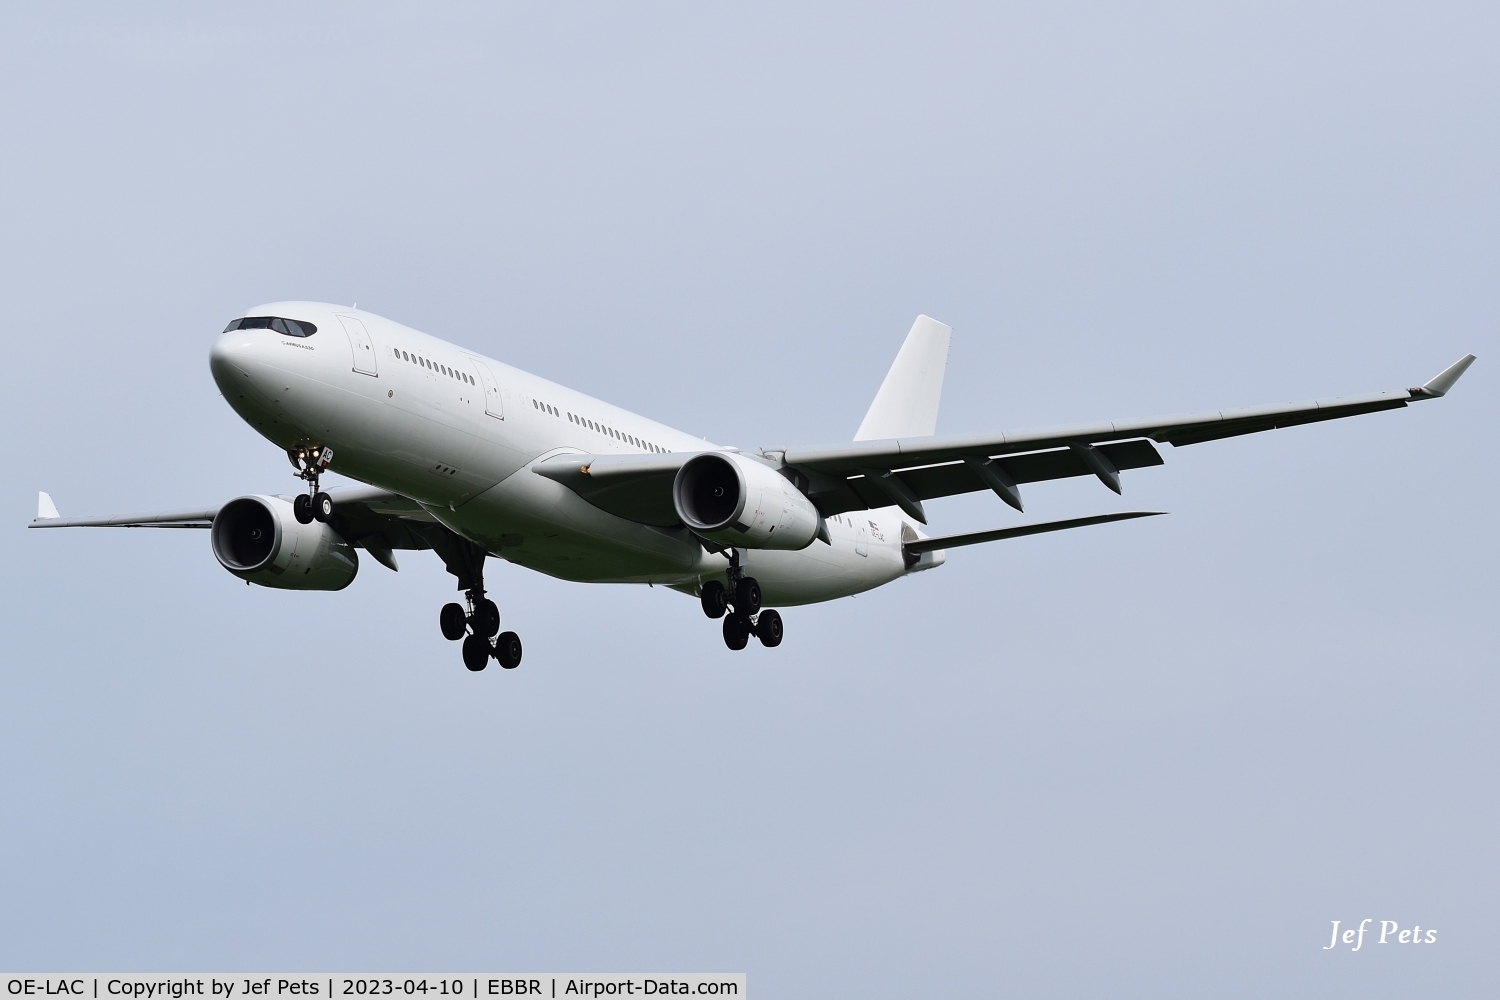 OE-LAC, 2013 Airbus A330-243 C/N 1486, Short final at Brussels Airport.